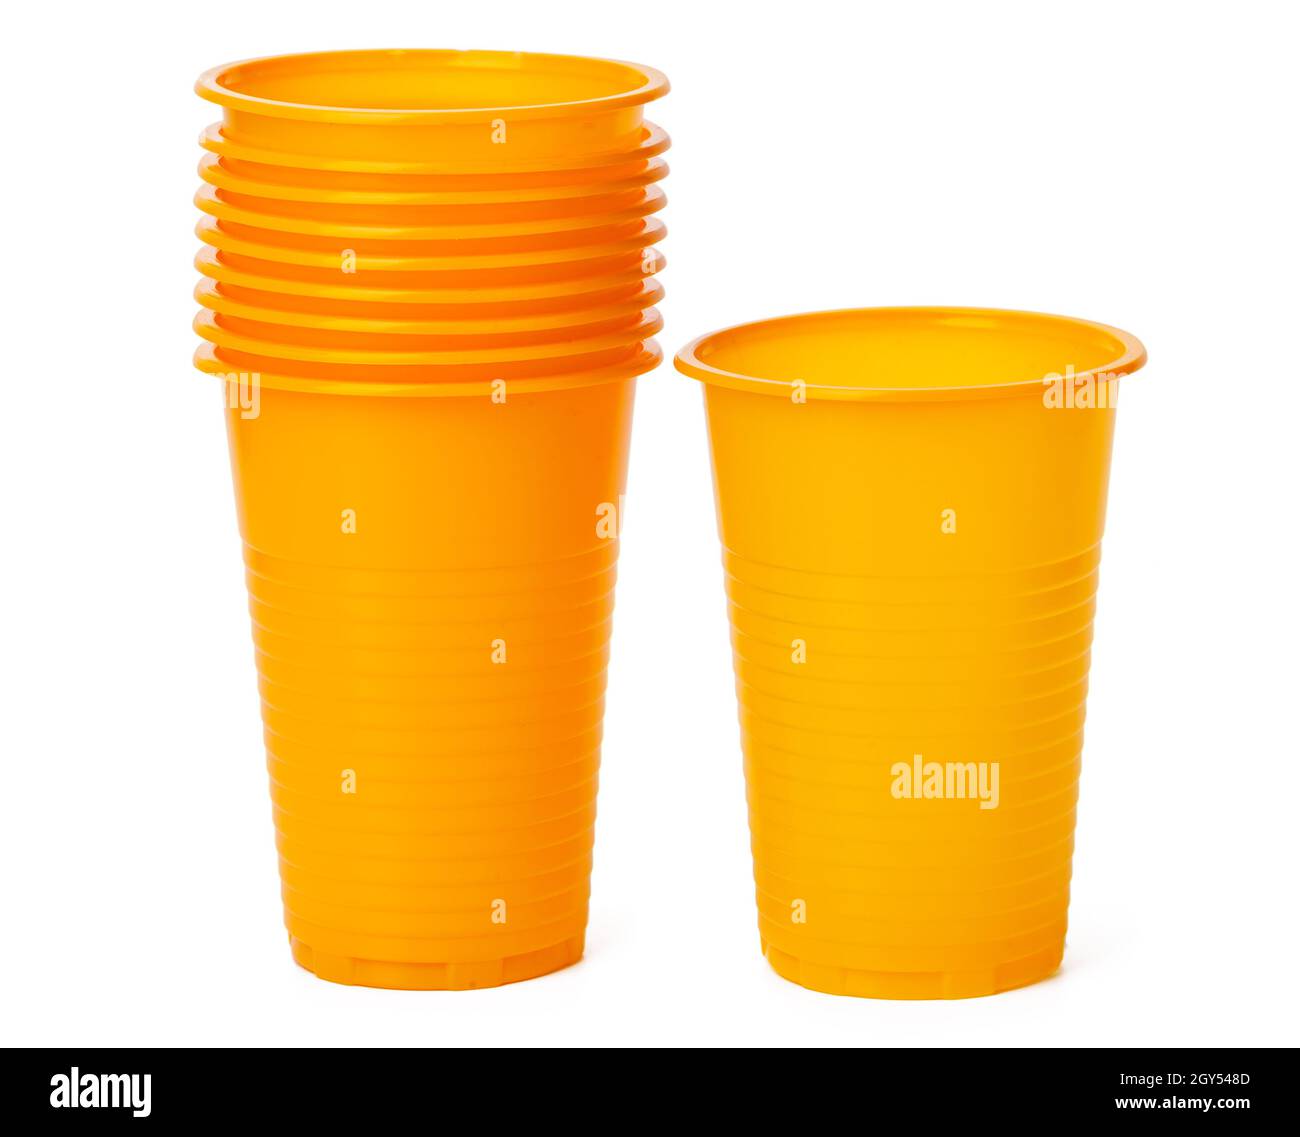 https://c8.alamy.com/comp/2GY548D/pile-of-plastic-cups-on-white-background-2GY548D.jpg